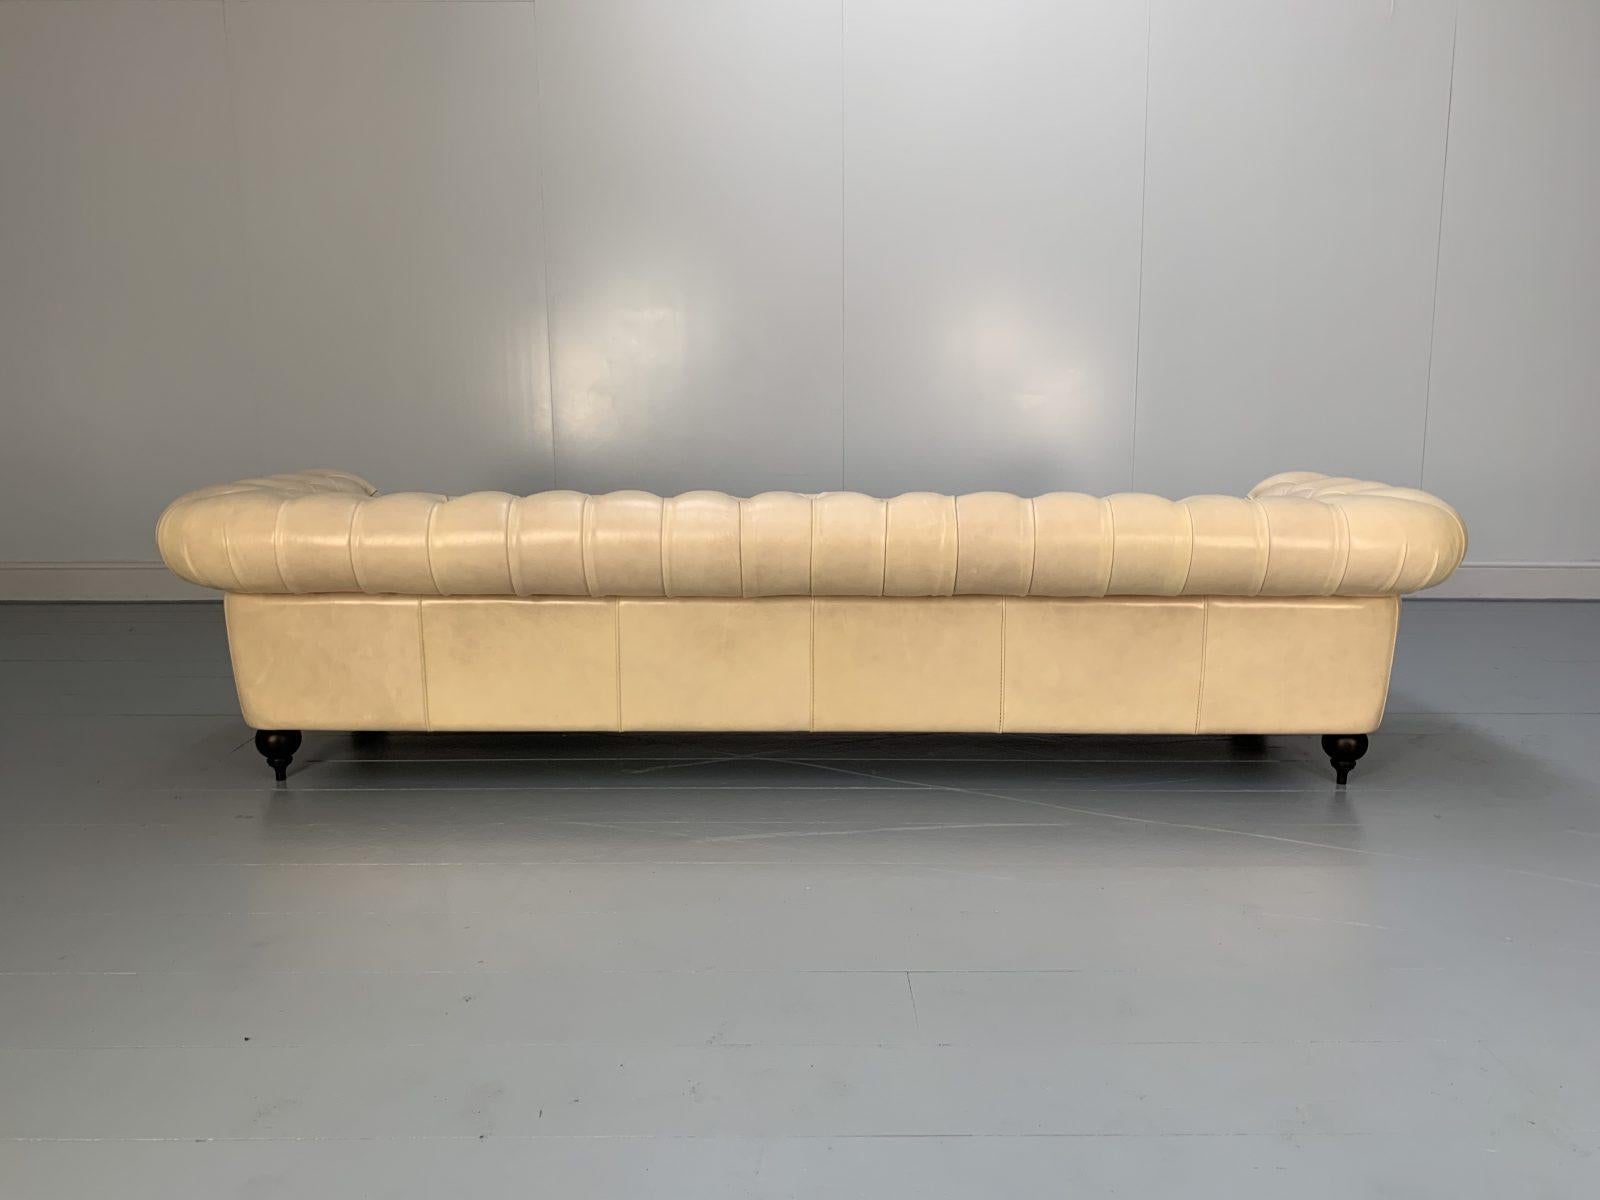 Contemporary Baxter of Italy “Diana Chester” 4-Seat Sofa in Cream “Tuscany” Leather For Sale